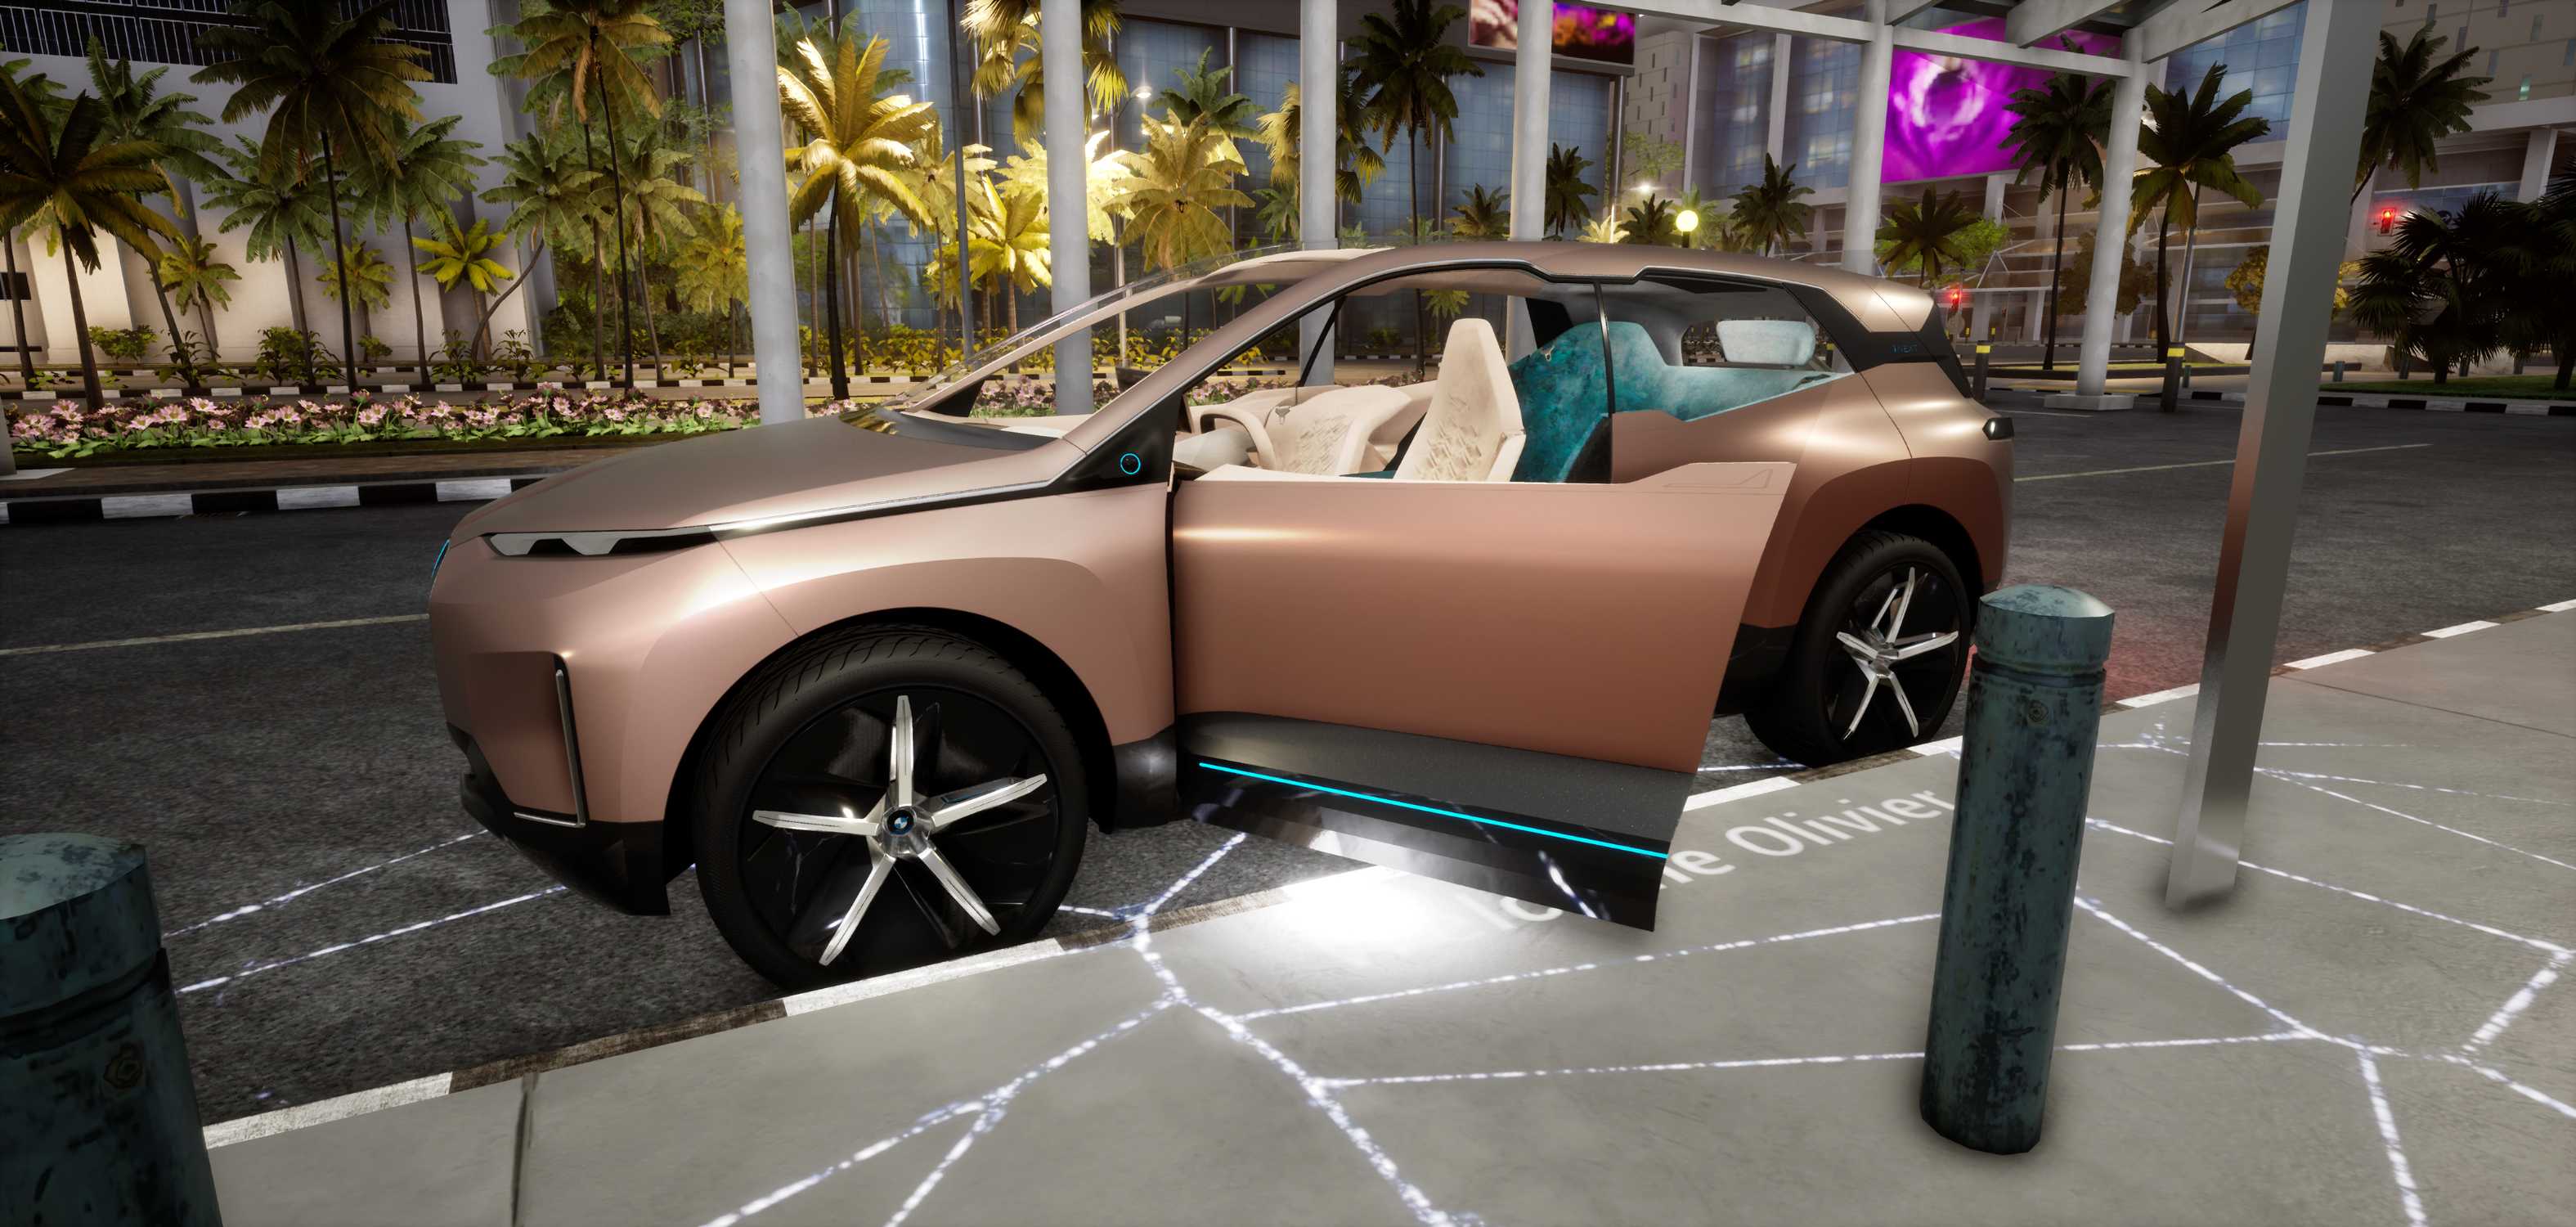 BMW Group @ MWC 2019 - Mixed Reality. (02/19)